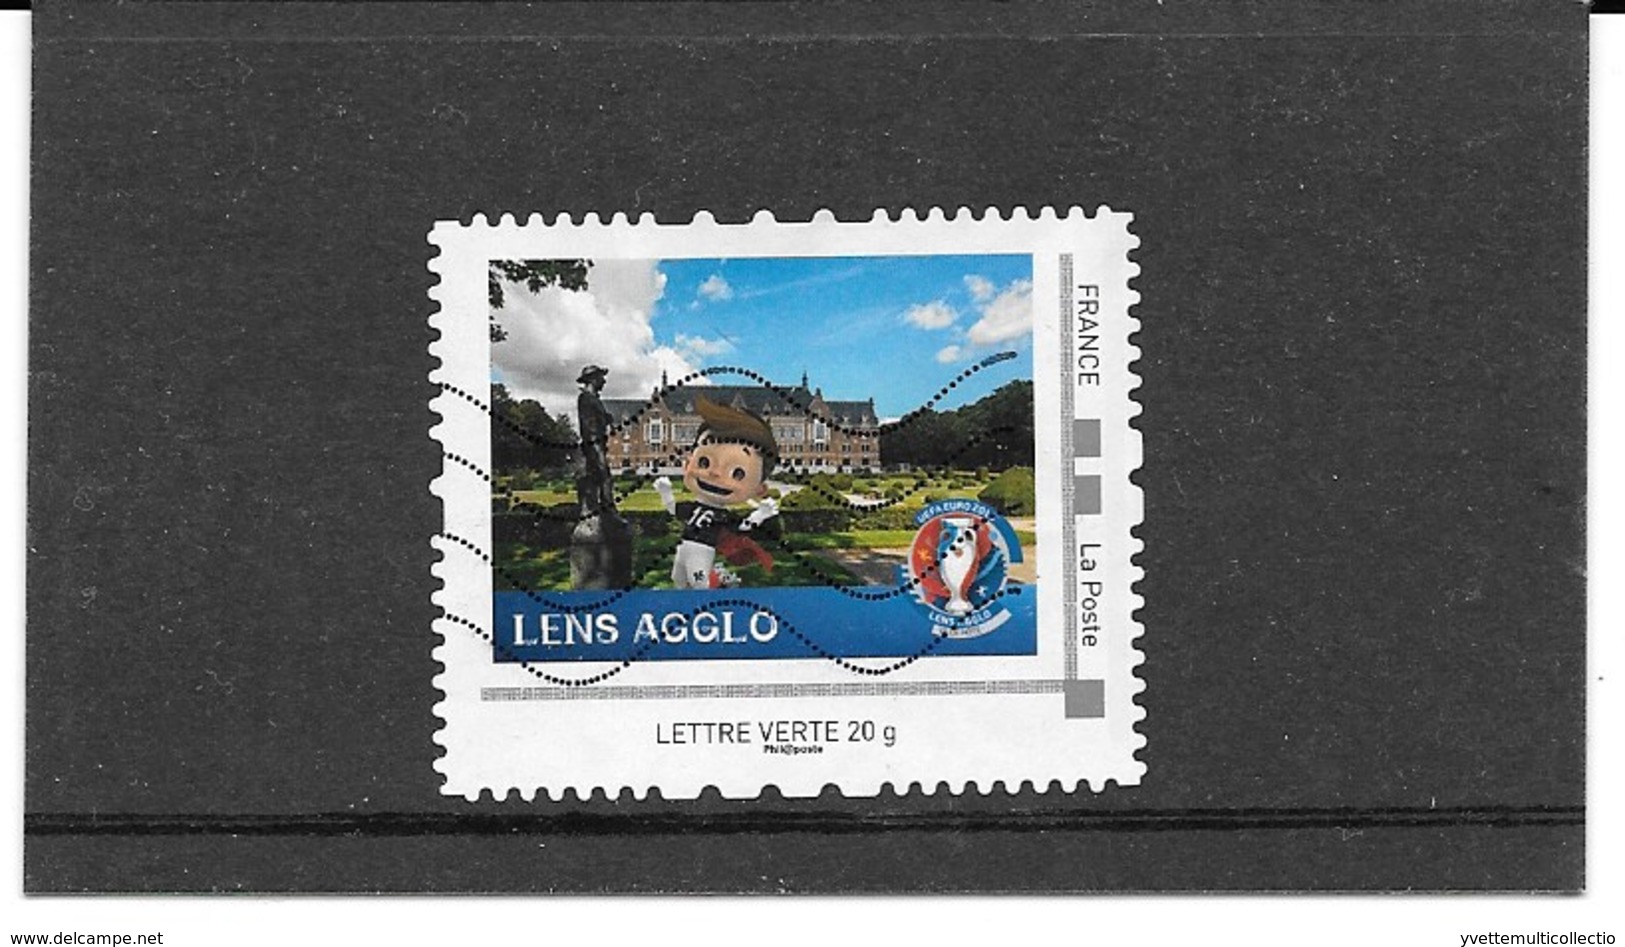 FRANCE 2016.TIMBRE COLLECTOR MONTIMBRAMOI OBLITERE.EURO 2016 DE FOOTBALL."LENS ACCLO"IDT PHILAPOSTE. LETTRE VERTE 20 G - Used Stamps